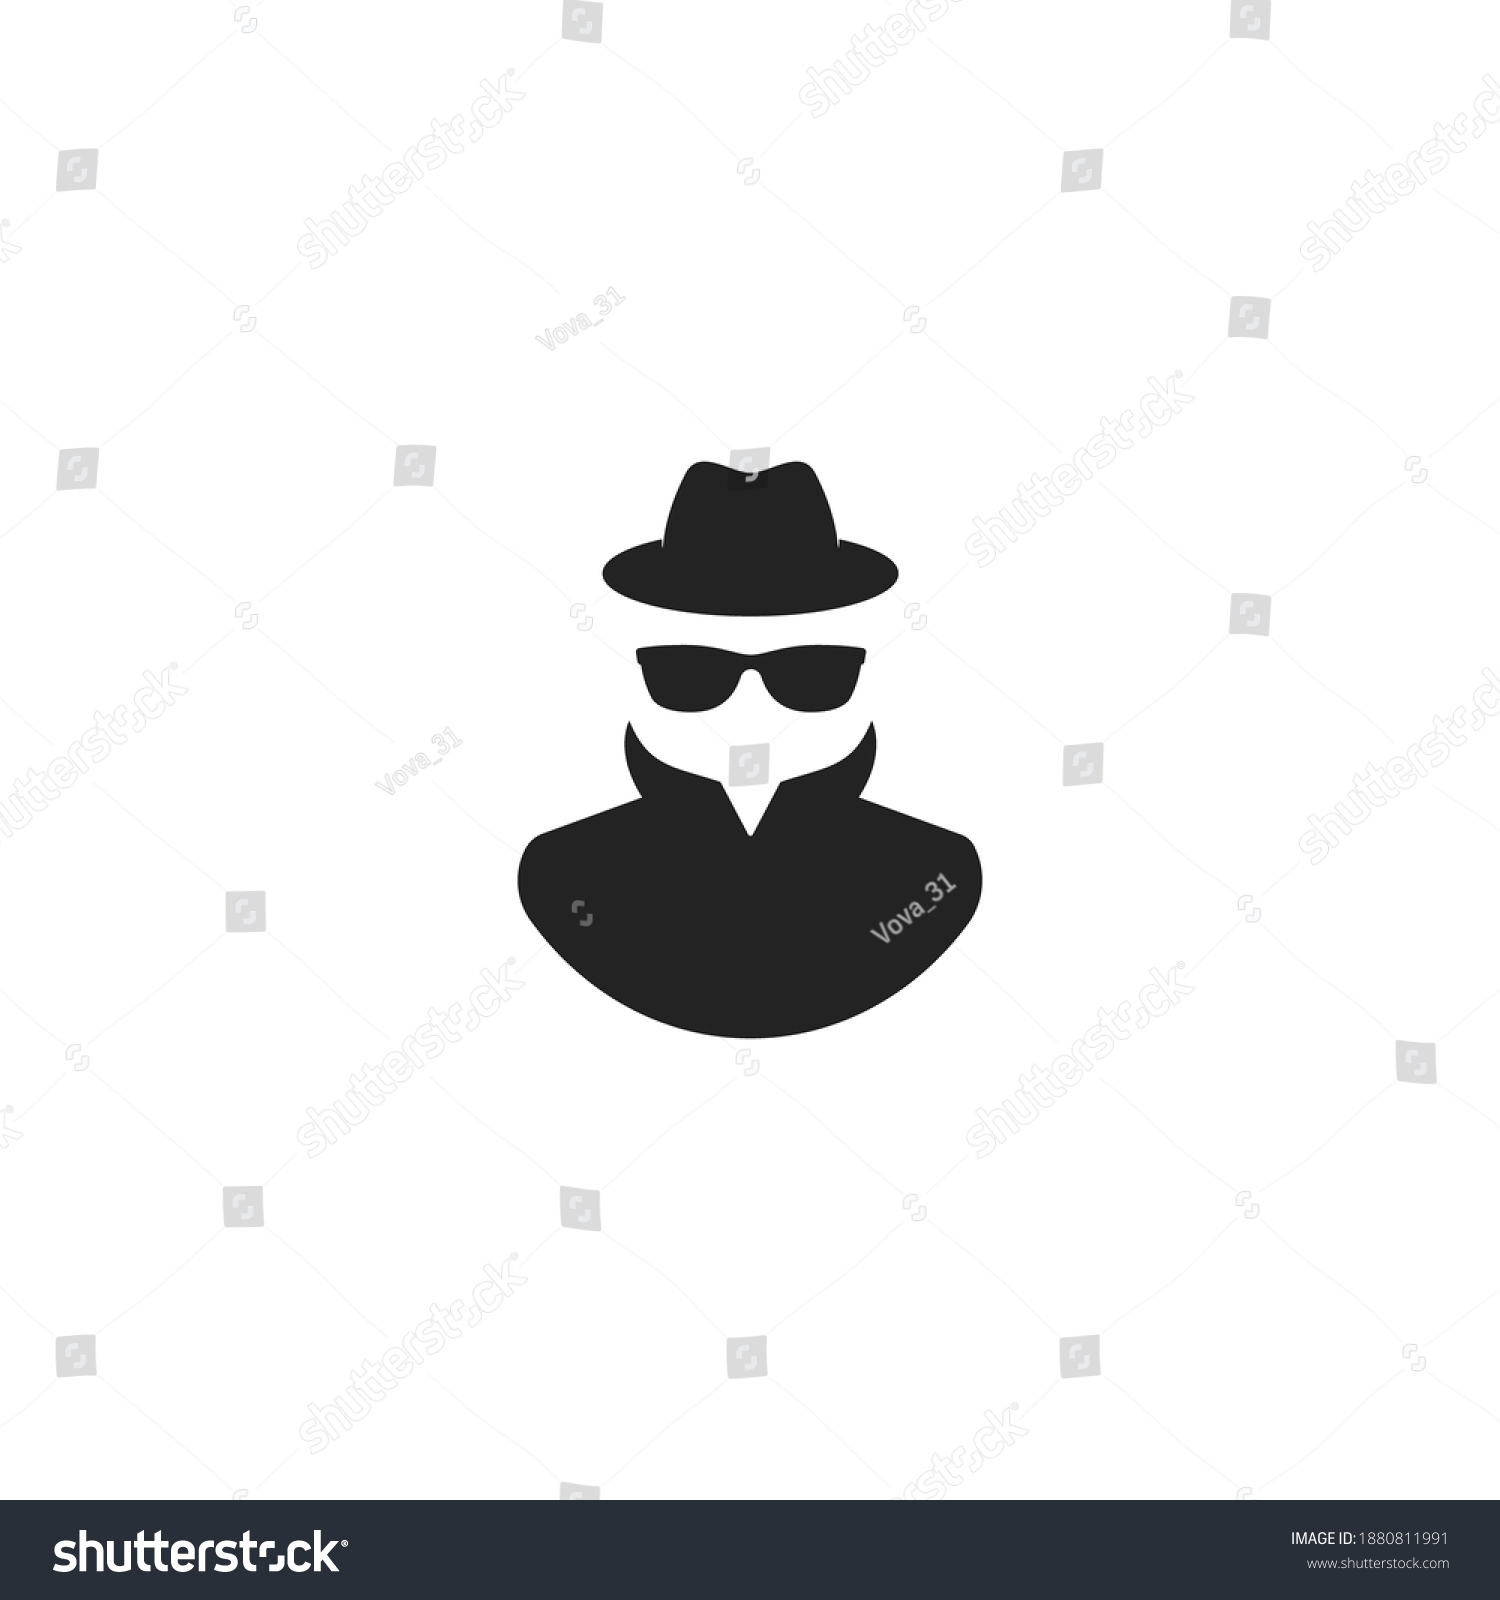 SVG of Agent icon. Spy sunglasses. Hat and glasses stock vector illustration flat style on white background svg